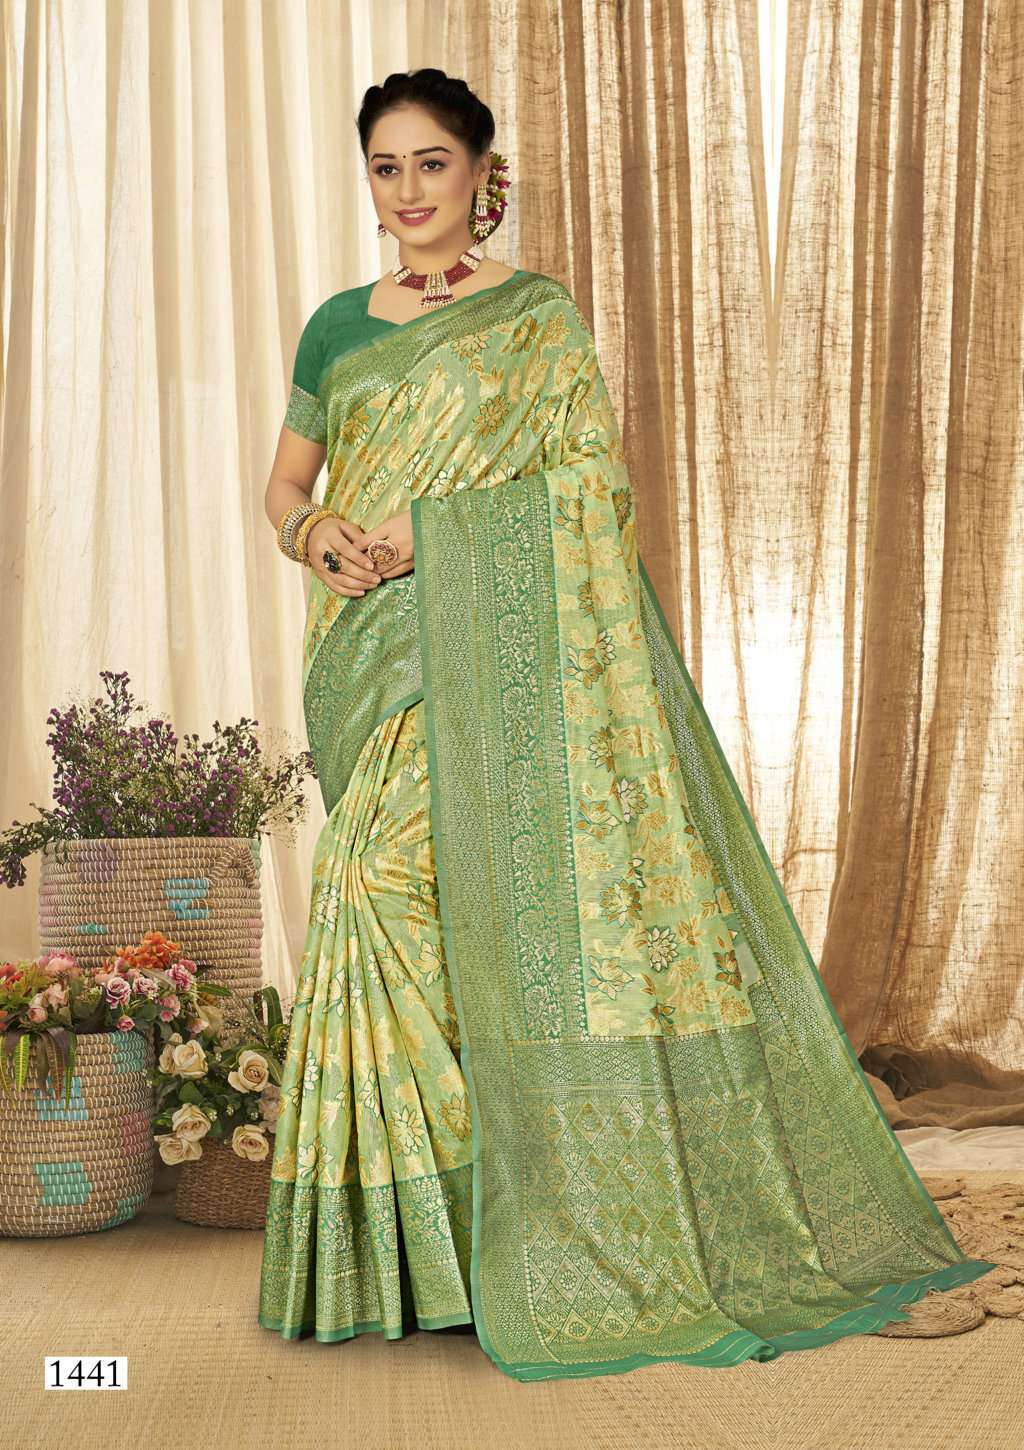 Details more than 95 organza sarees wholesale latest